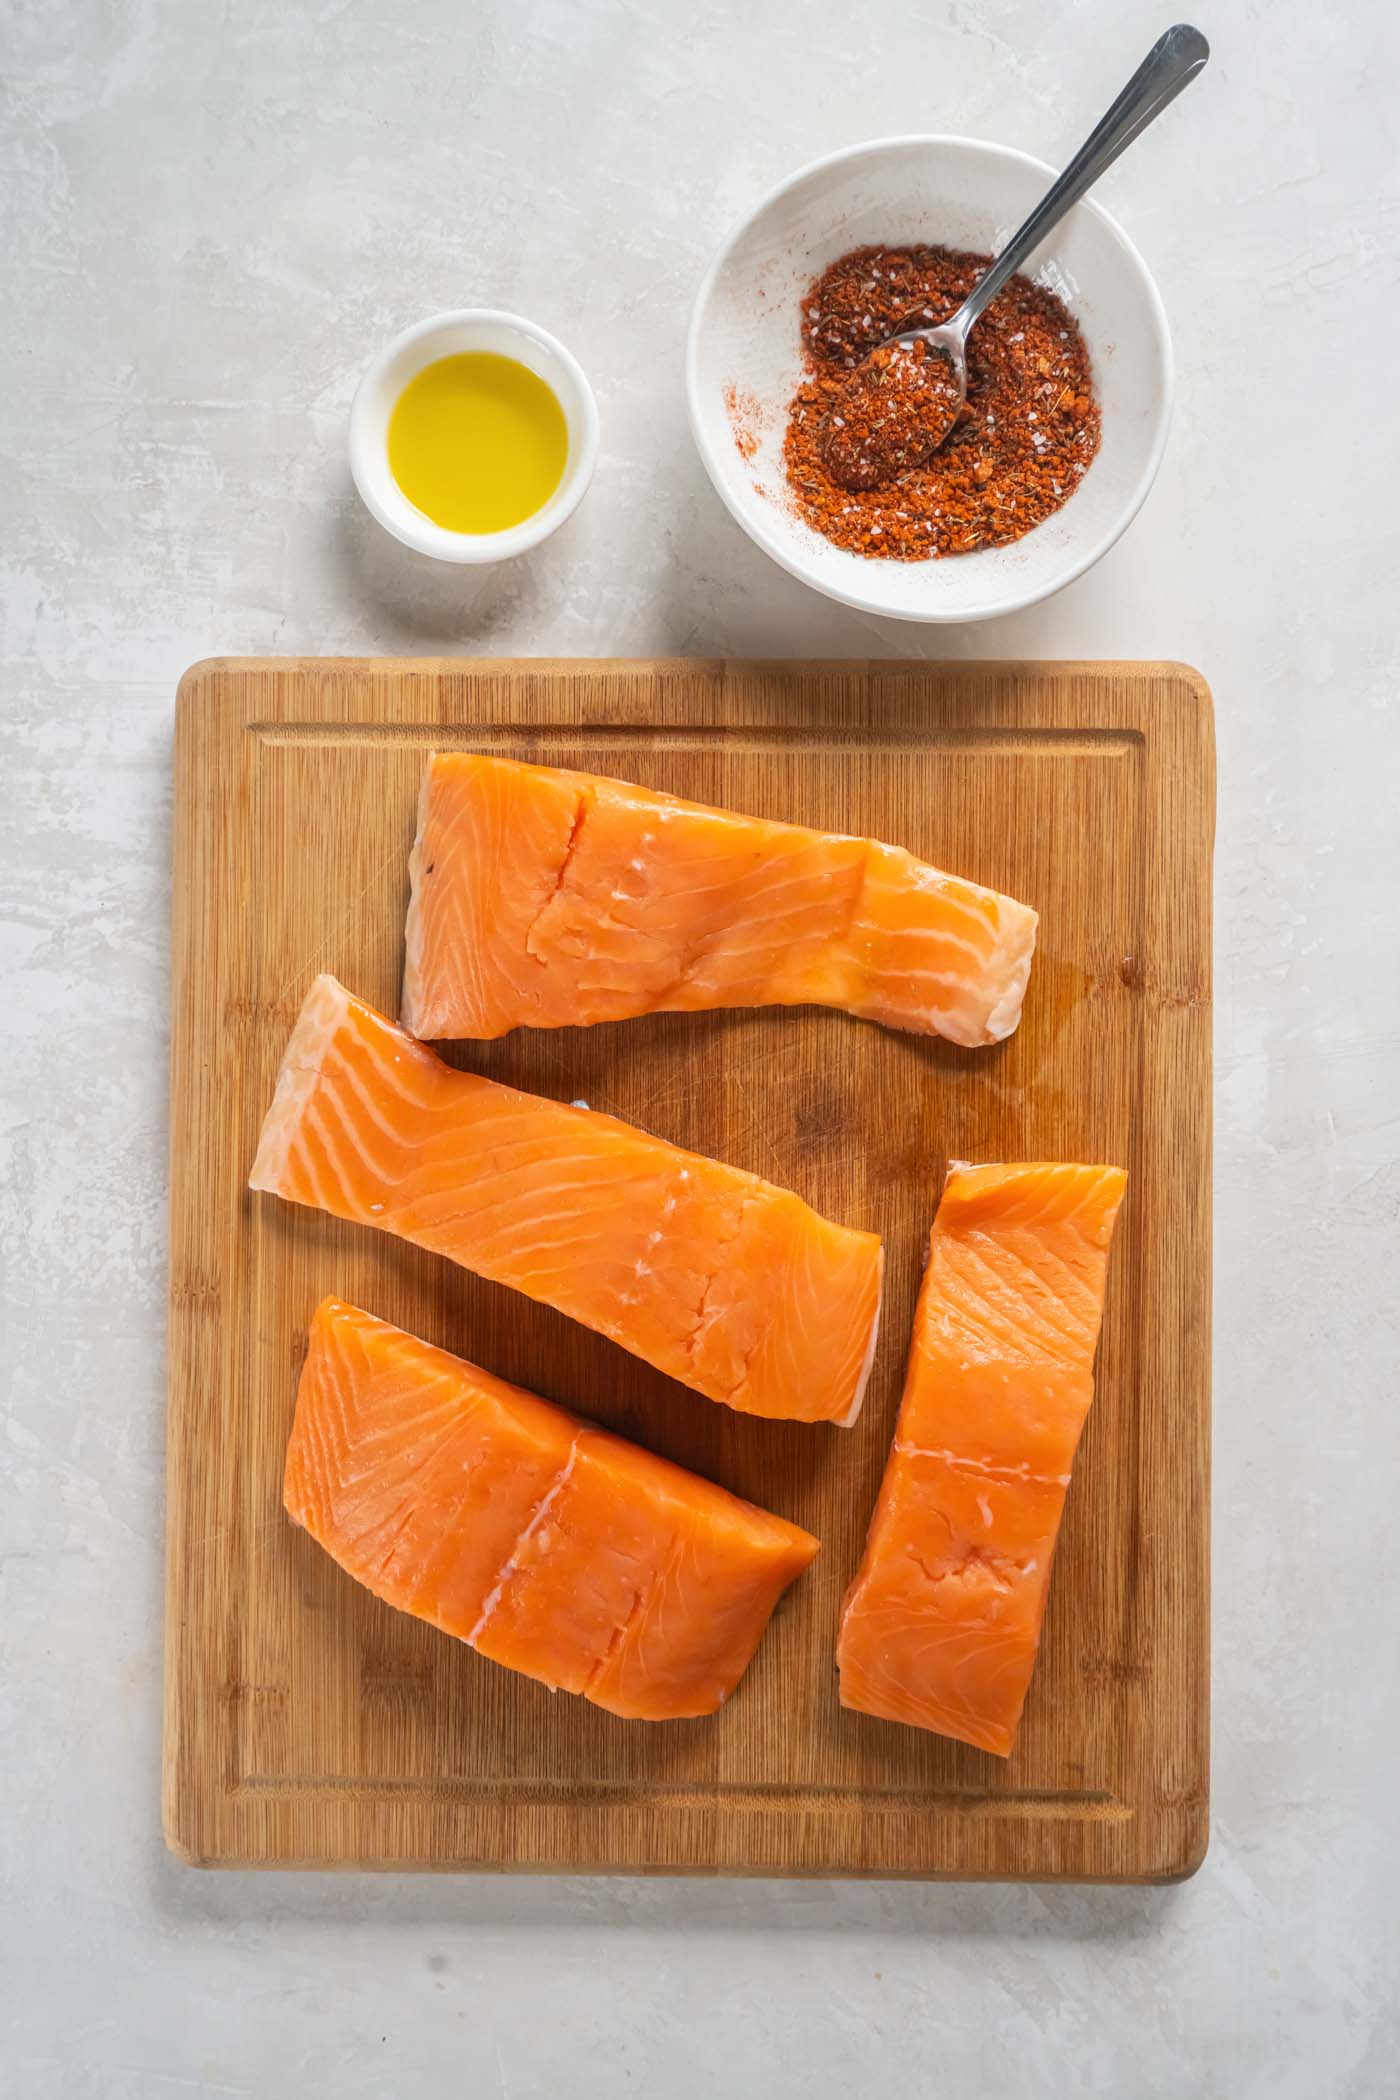 Four raw salmon fillets on a cutting board, alongside a small dish of olive oil and a bowl with salmon seasoning.